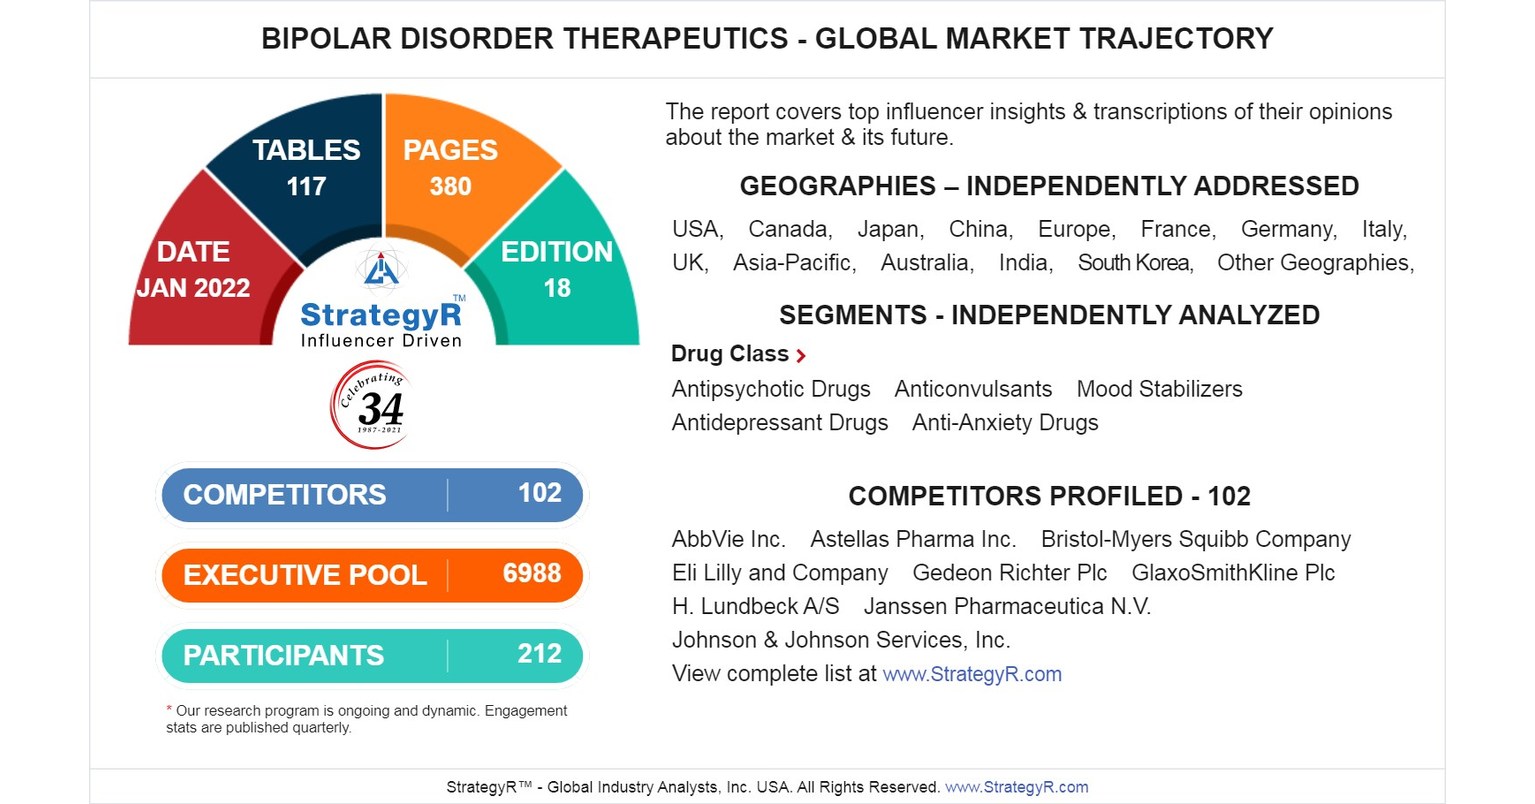 Platform for bipolar disorder research launched with $150 million, Philanthropy news